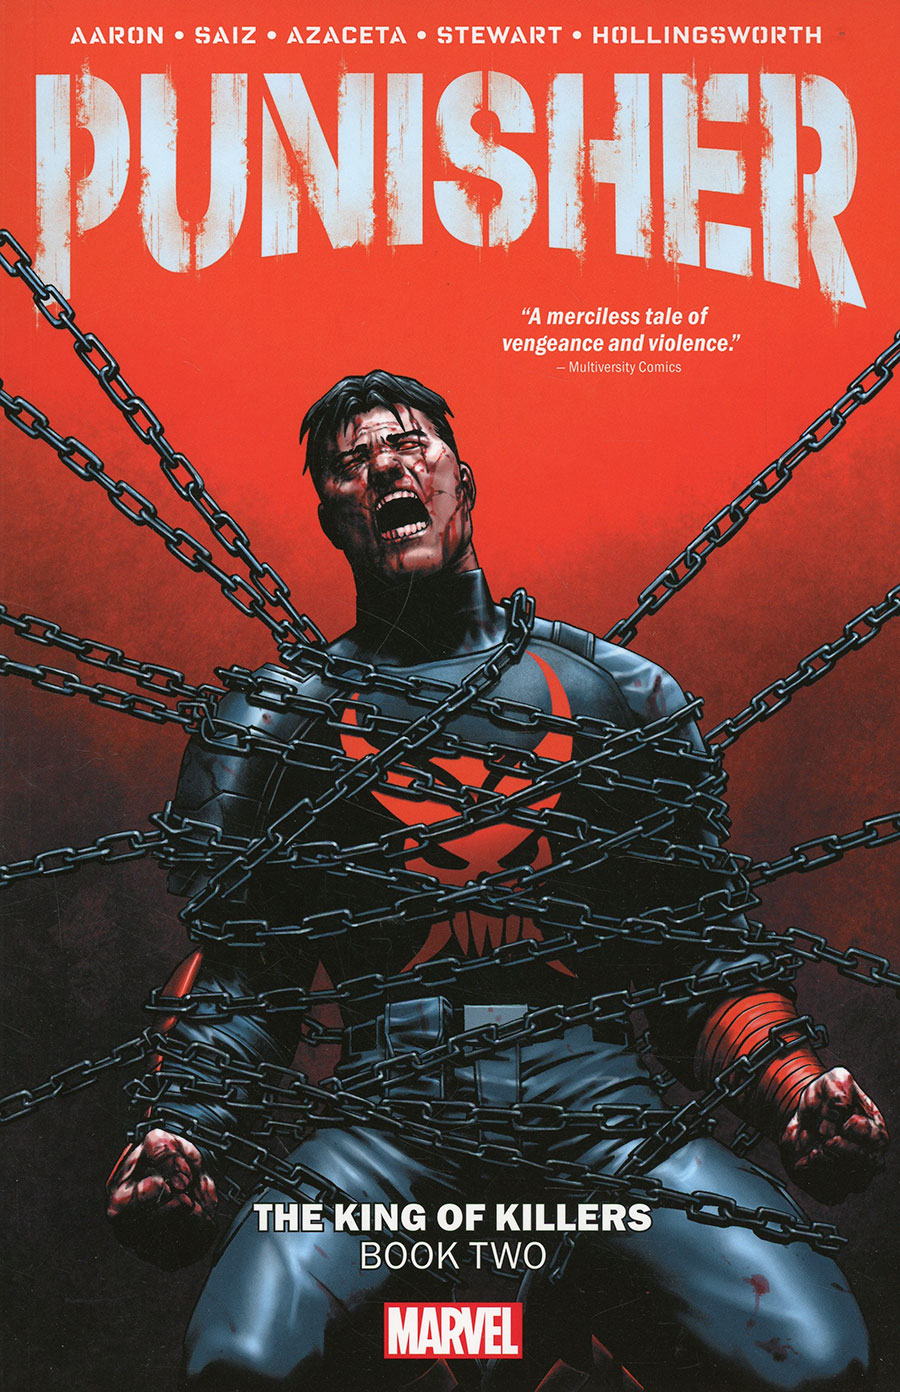 Punisher (2022) Vol 2 The King Of Killers Book 2 TP